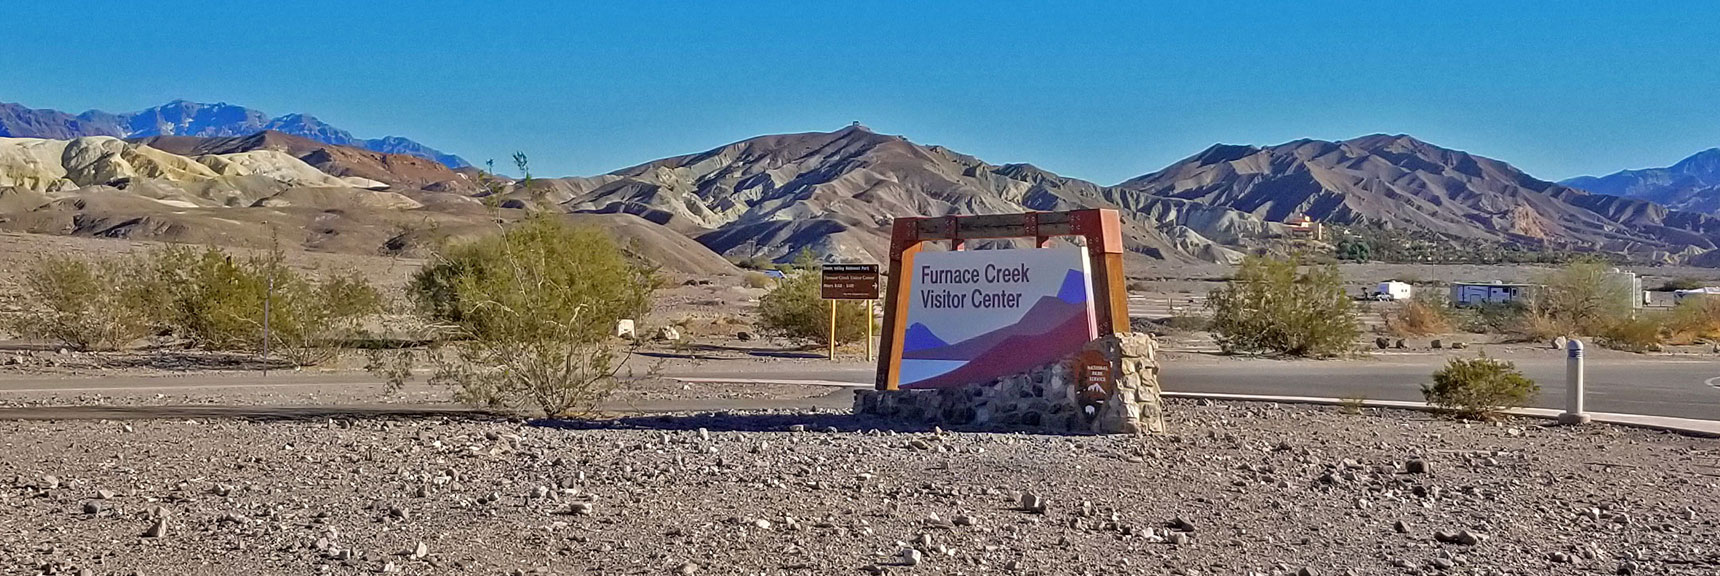 Tea House Seen from the Furnace Creek Visitor Center (above sign and to left) | Tea House & Table Rock Circuit | Furnace Creek | Death Valley National Park, California